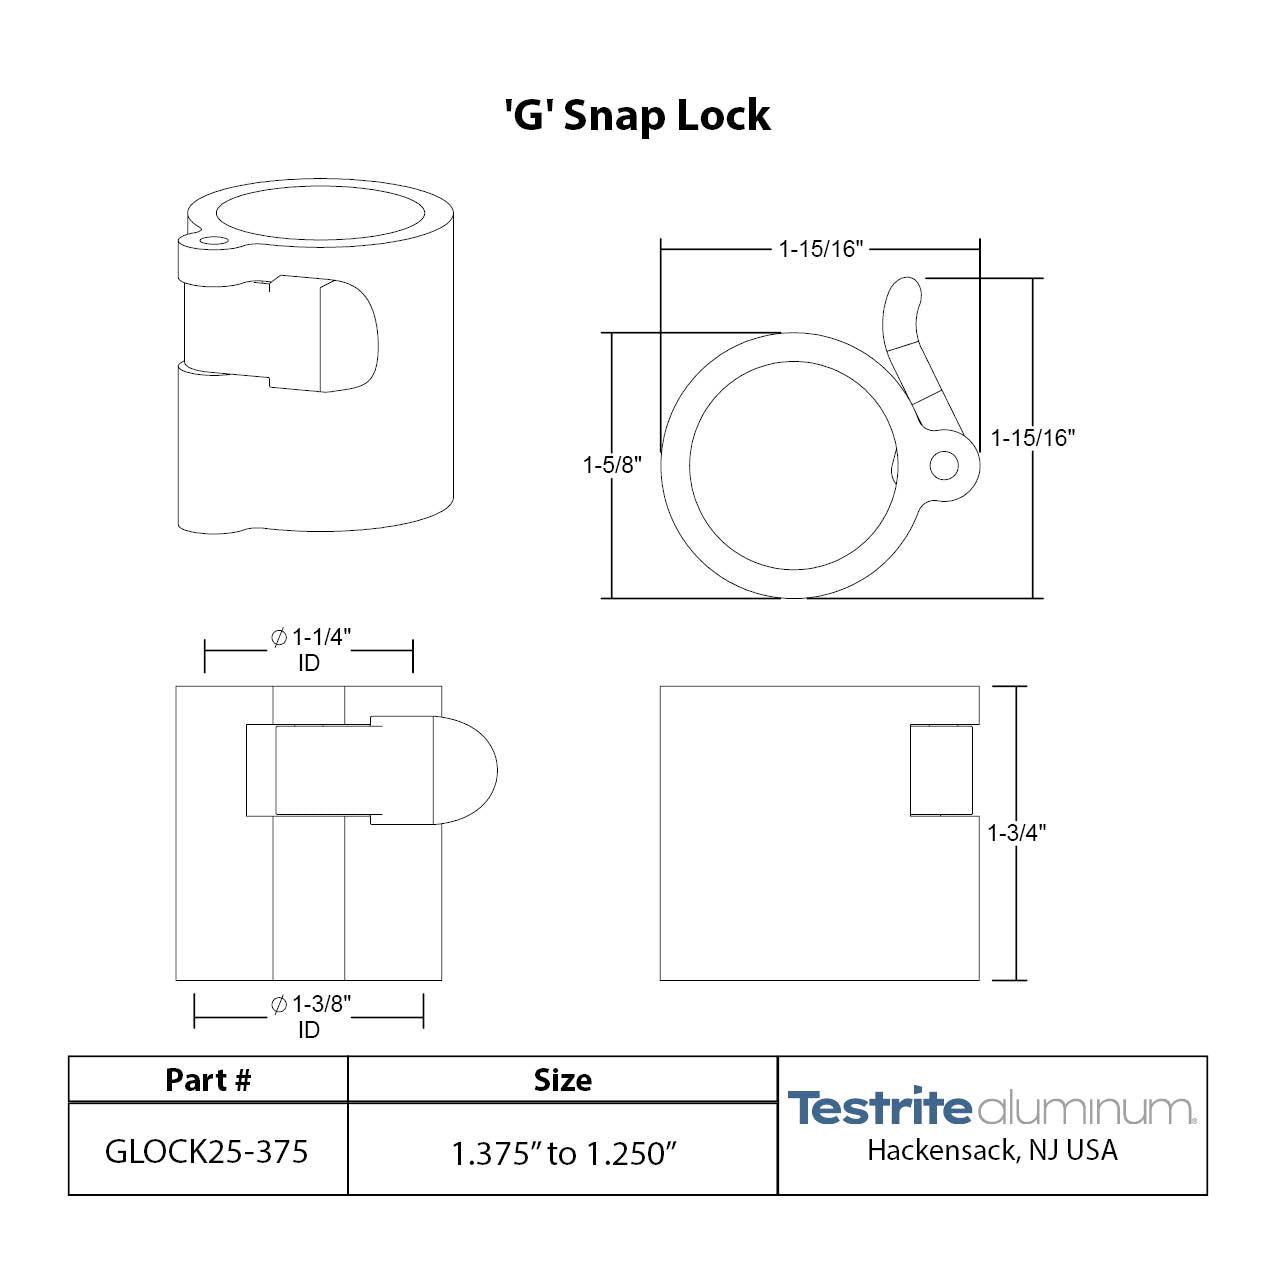 G Lock Spec sheet 1-1/4" to 1-3/8", telescopic tubing clamp 1.25" to 1.375"